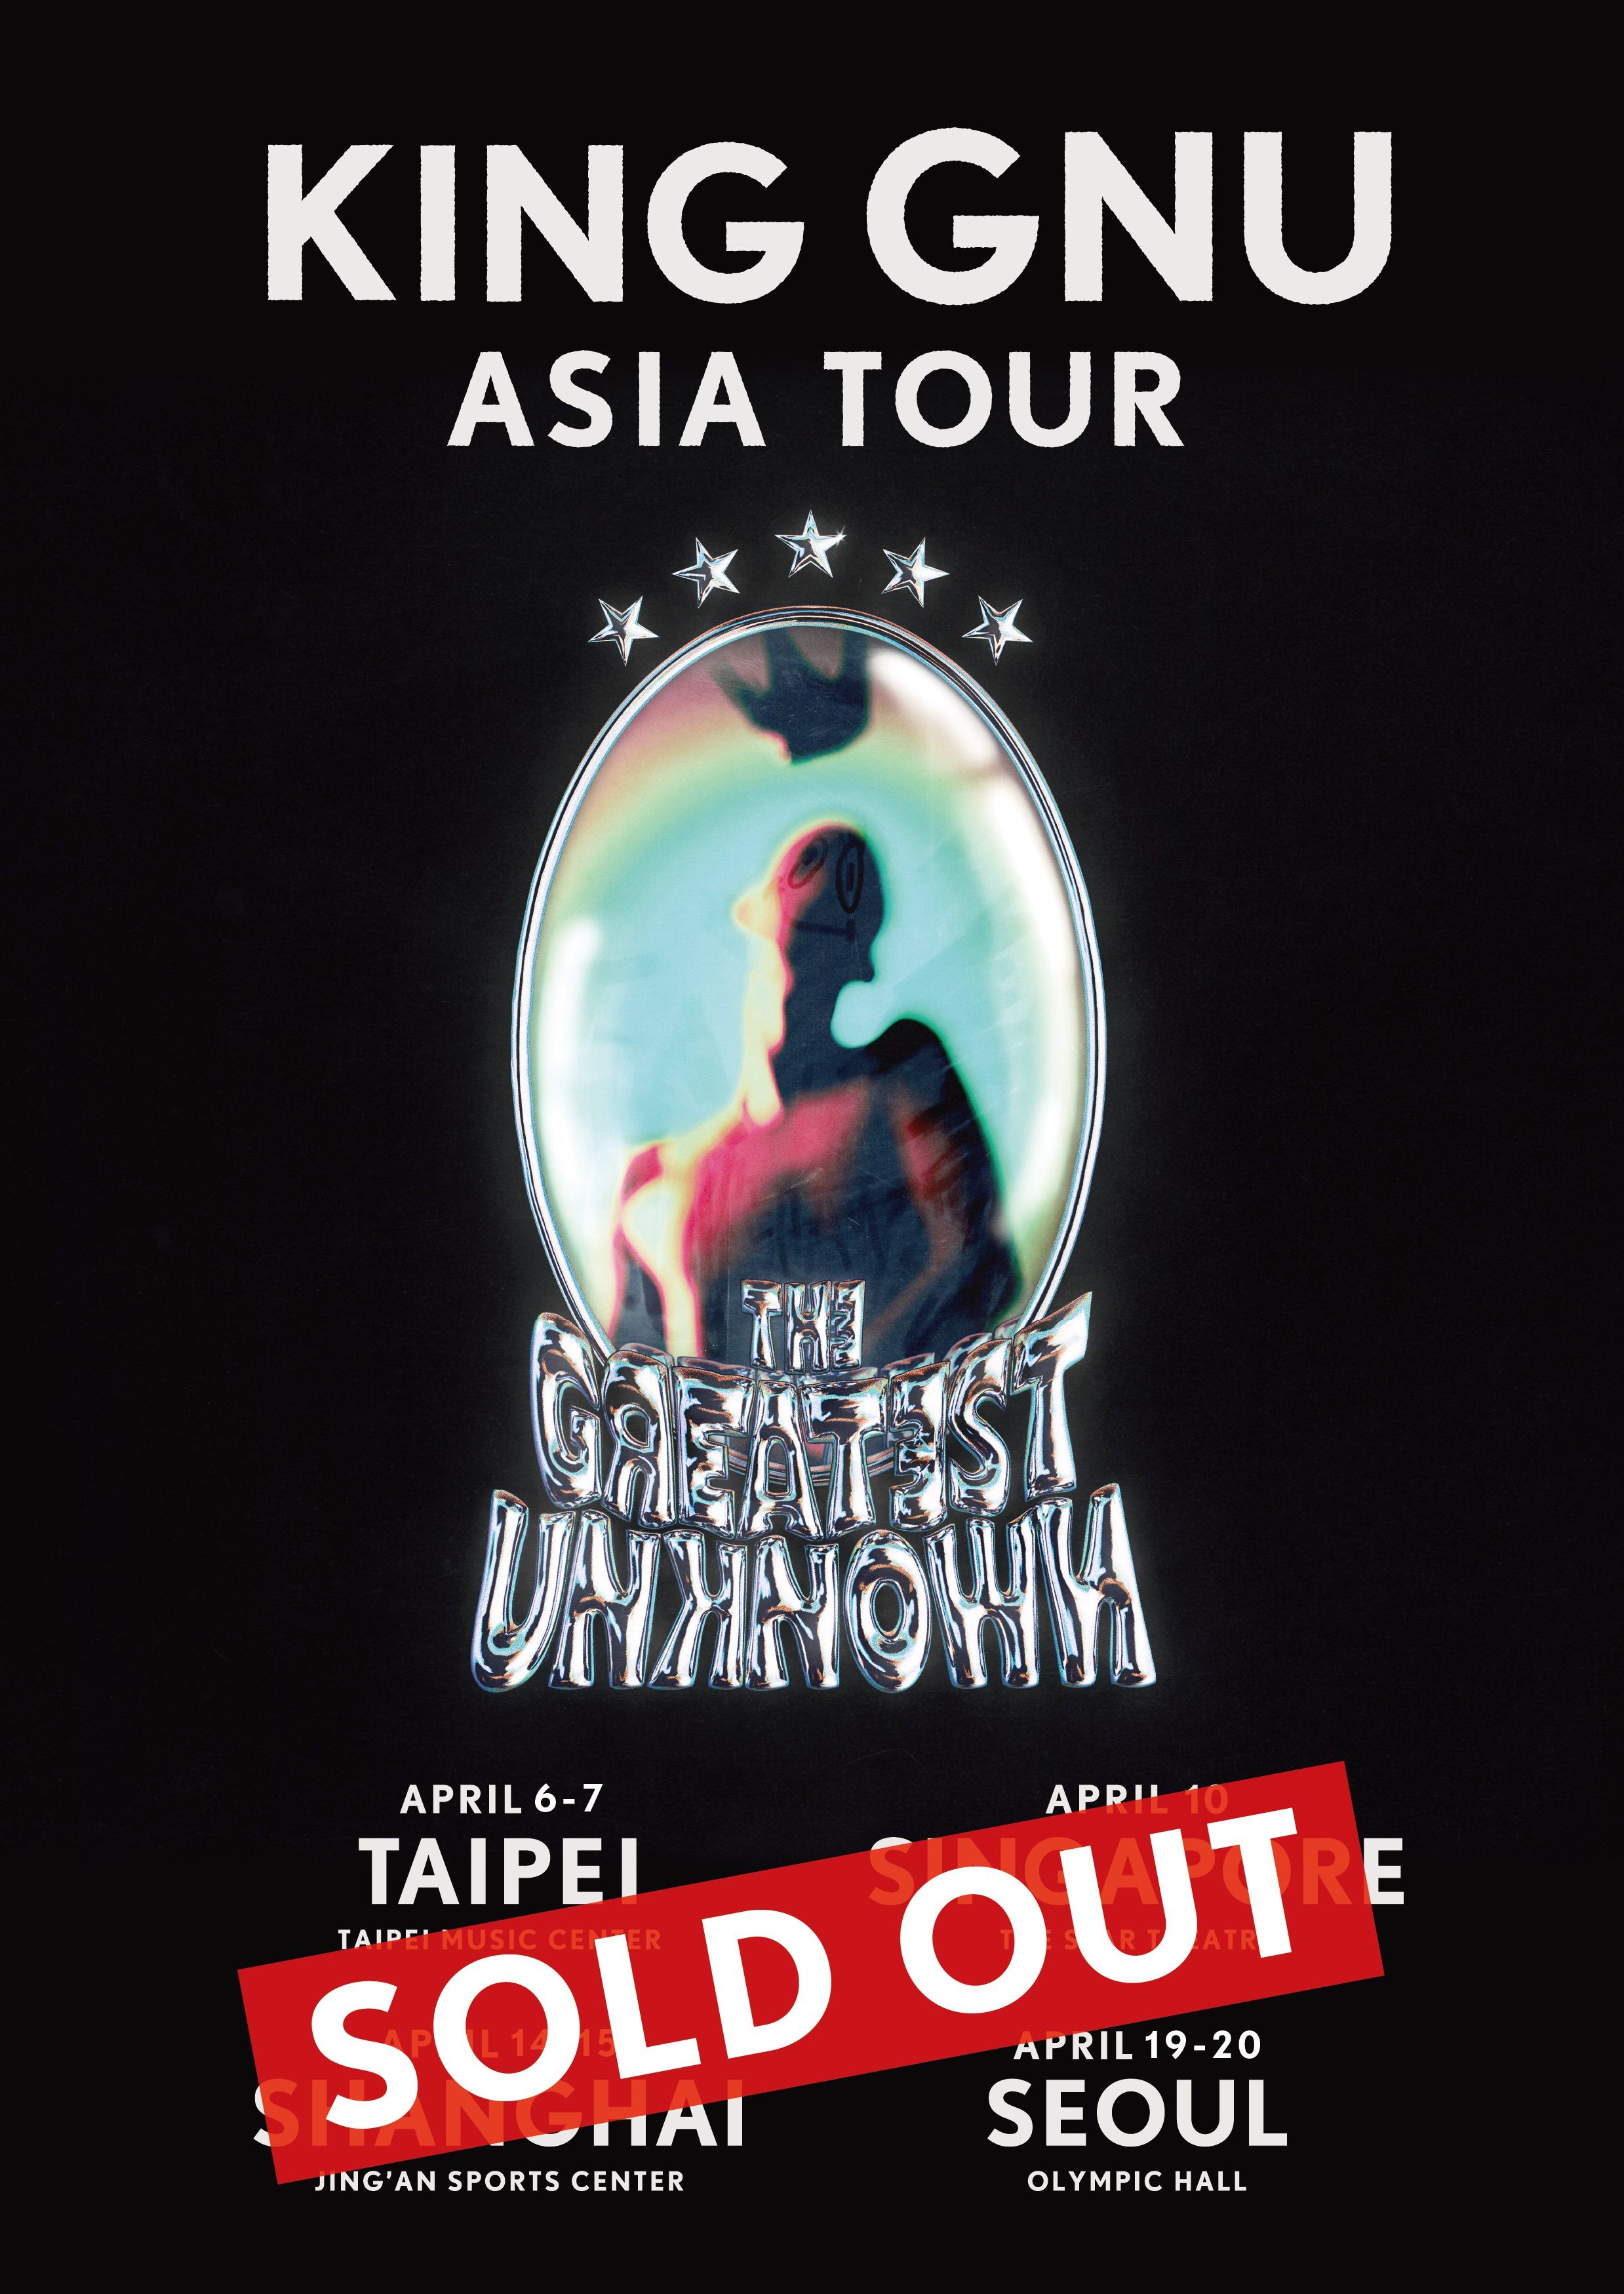 “King Gnu Asia Tour 「THE GREATEST UNKNOWN」“ アジア4都市 